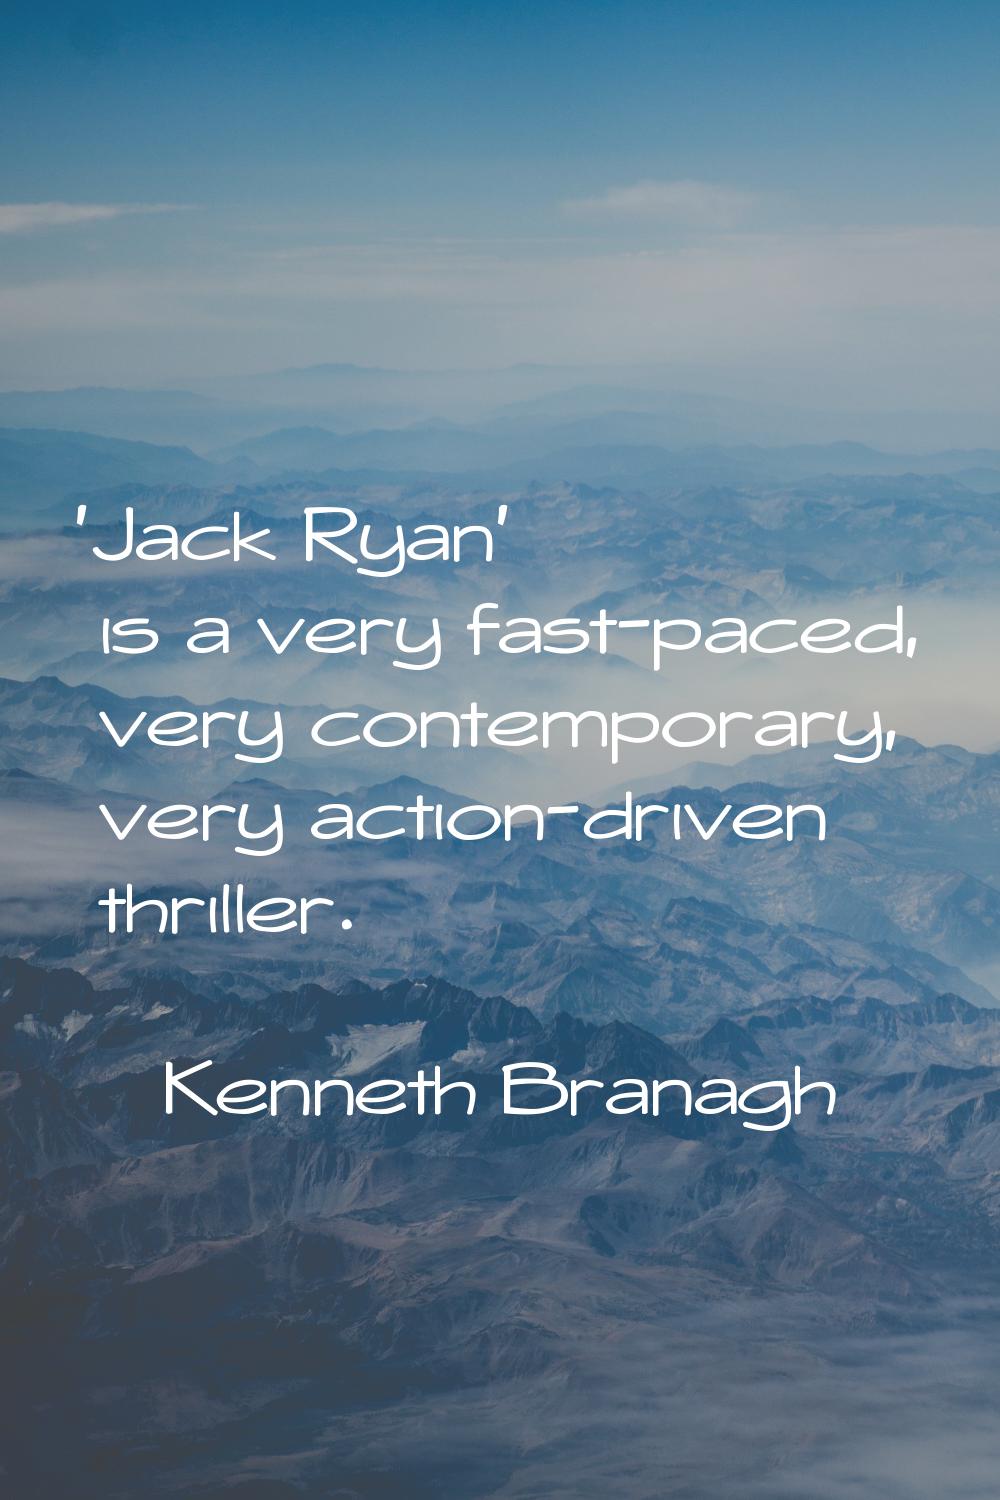 'Jack Ryan' is a very fast-paced, very contemporary, very action-driven thriller.